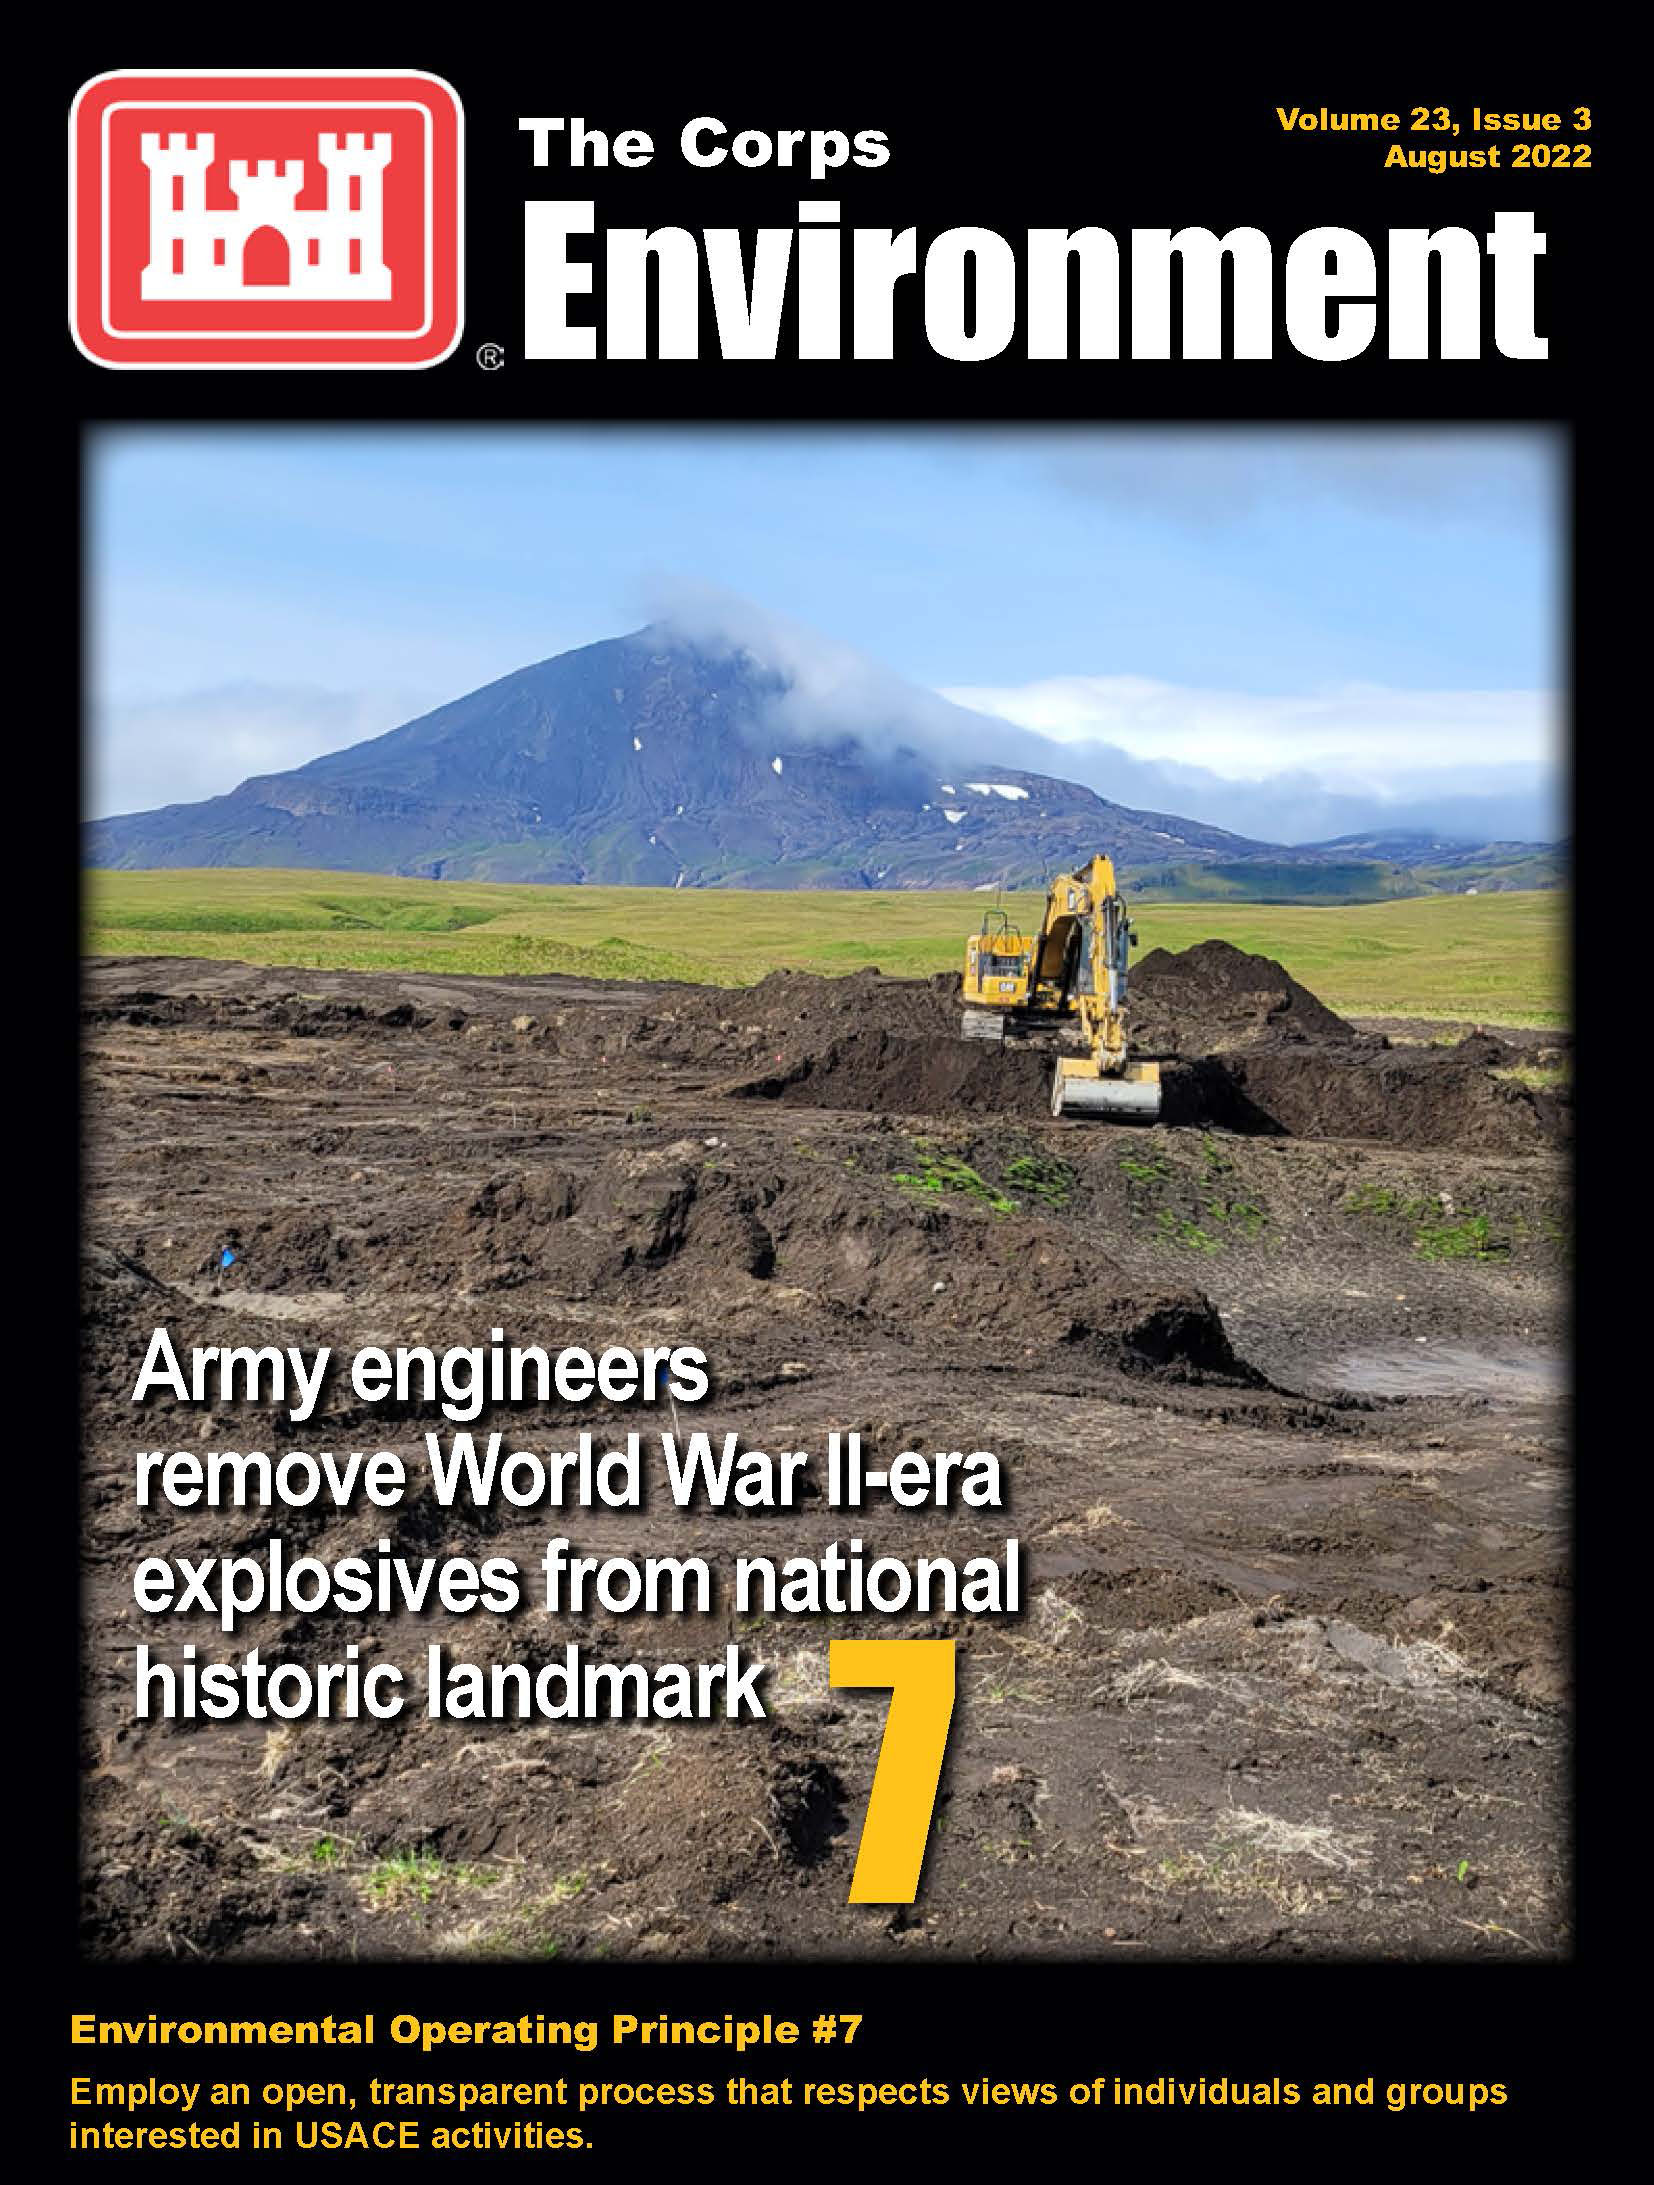 The Corps Environment Newsletter, Aug. 2022